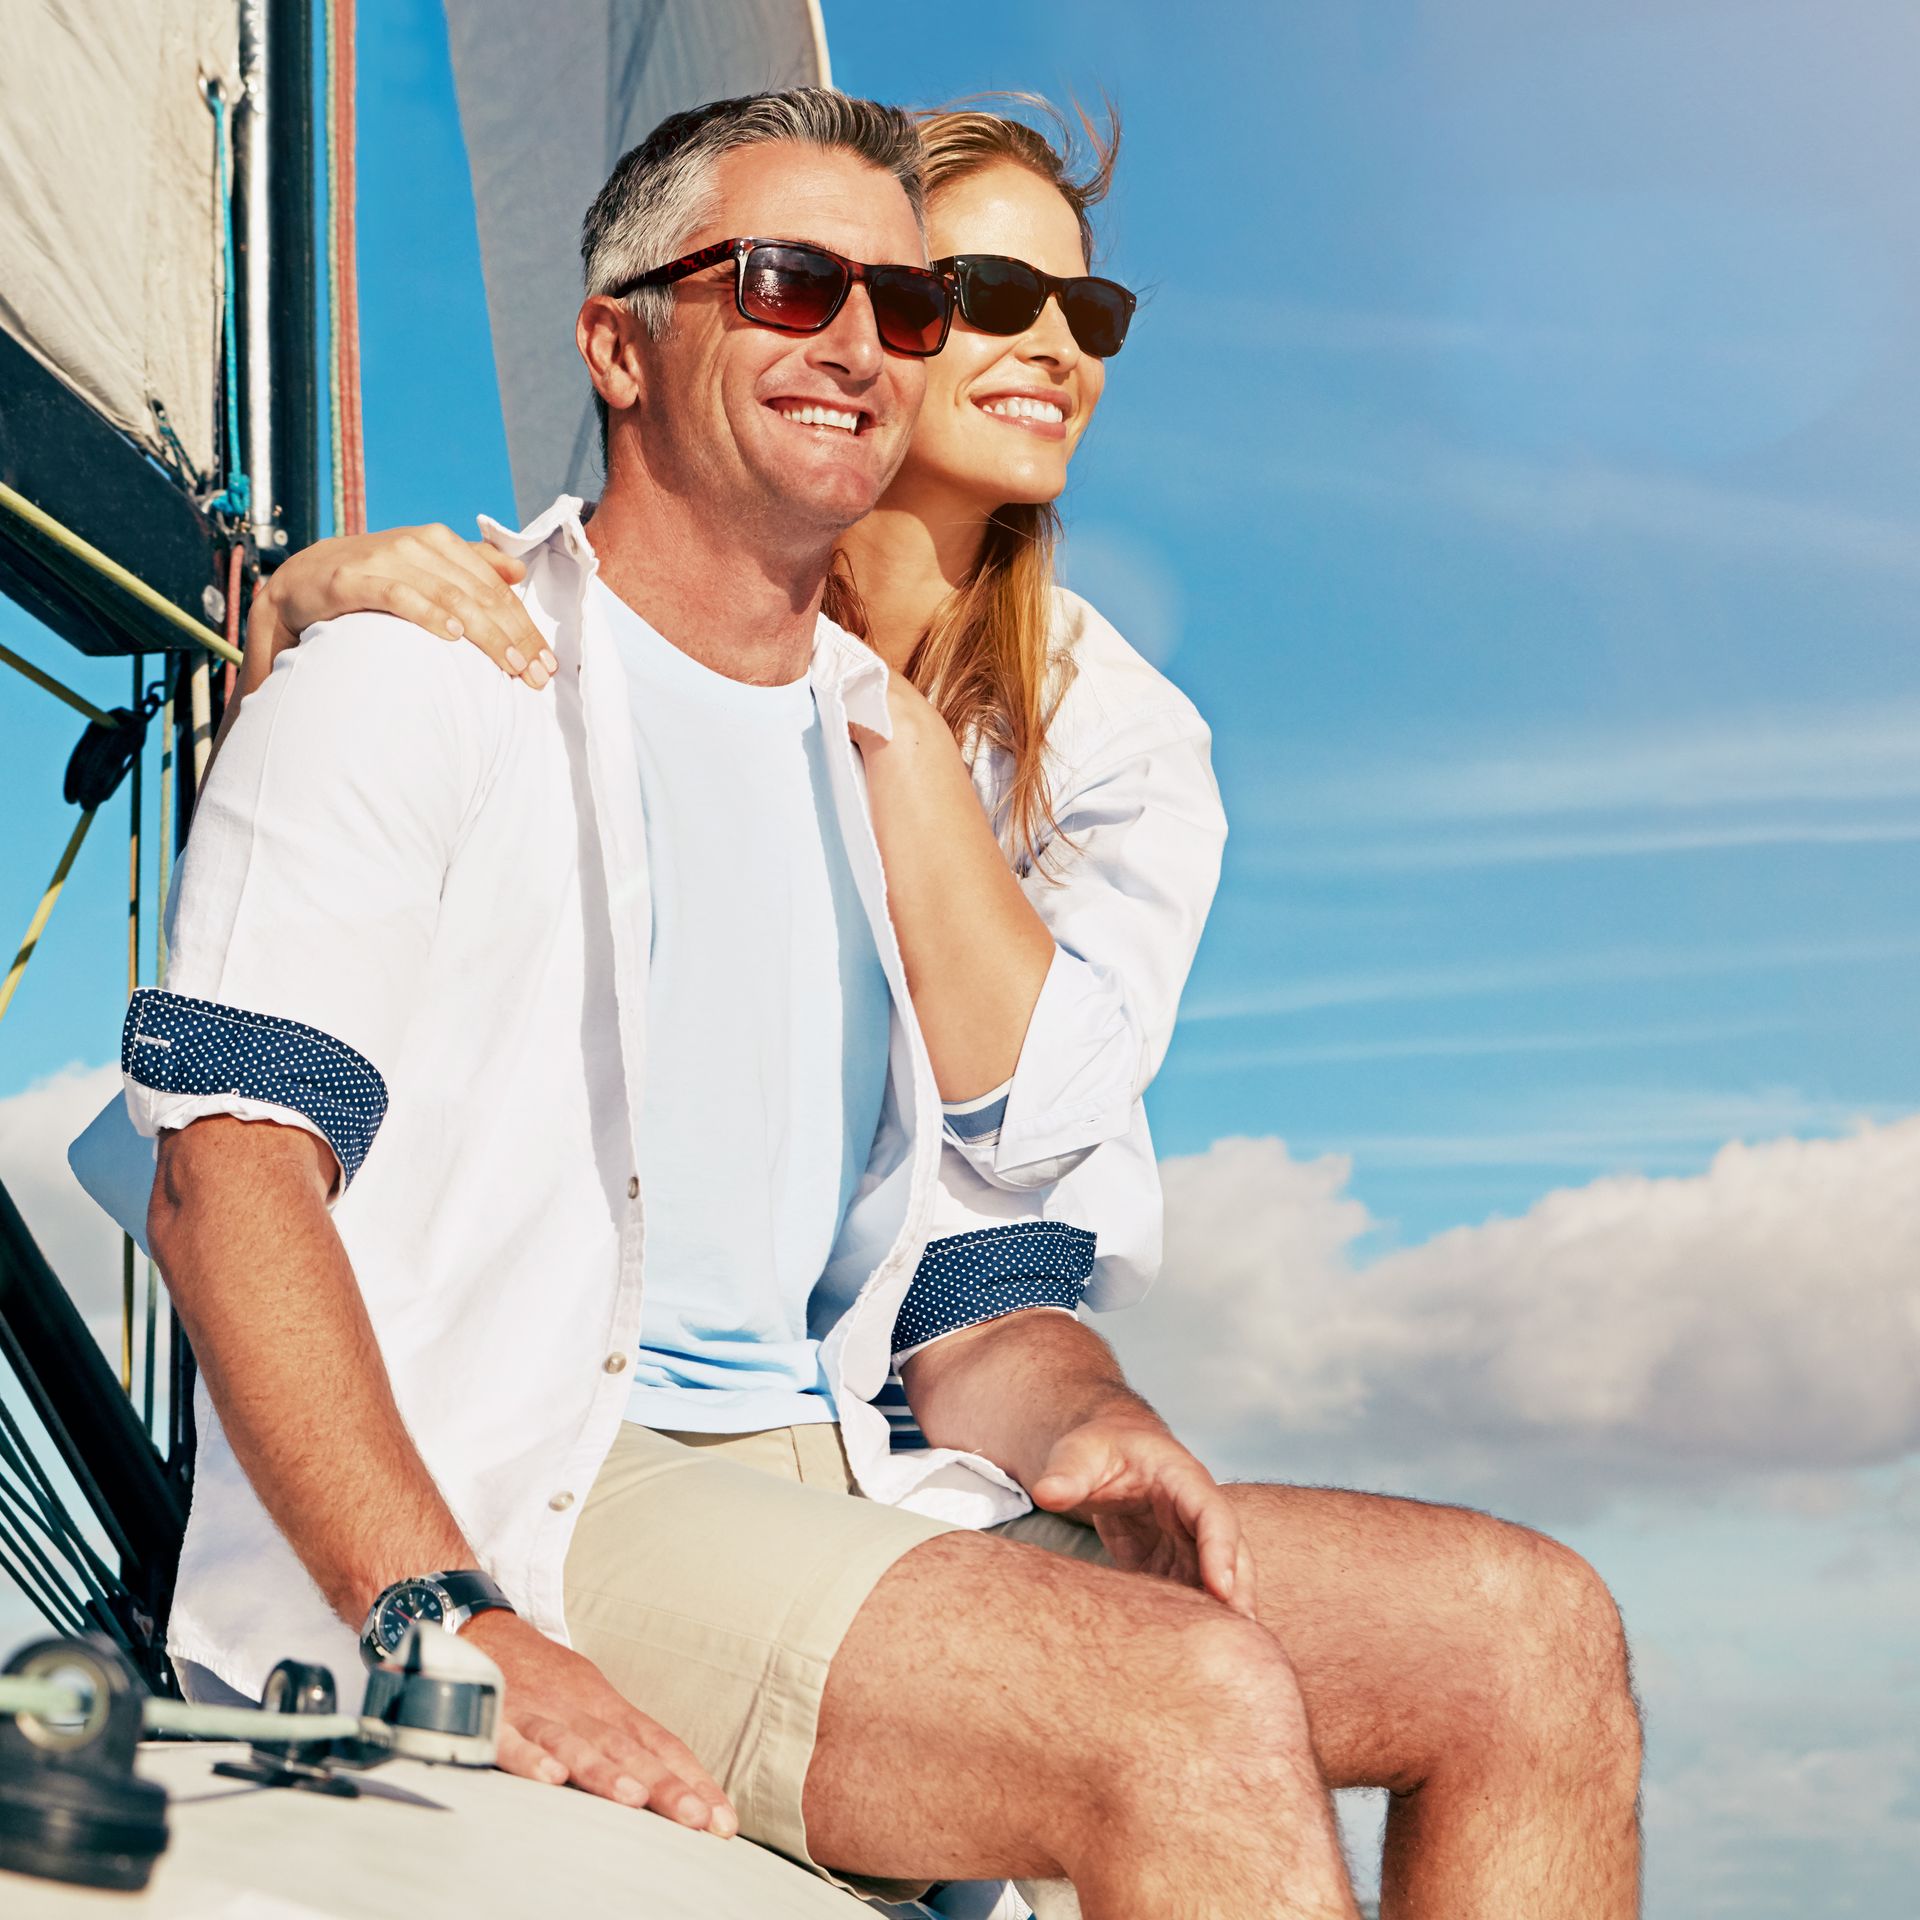 A man and woman wearing sunglasses are sitting on a sailboat